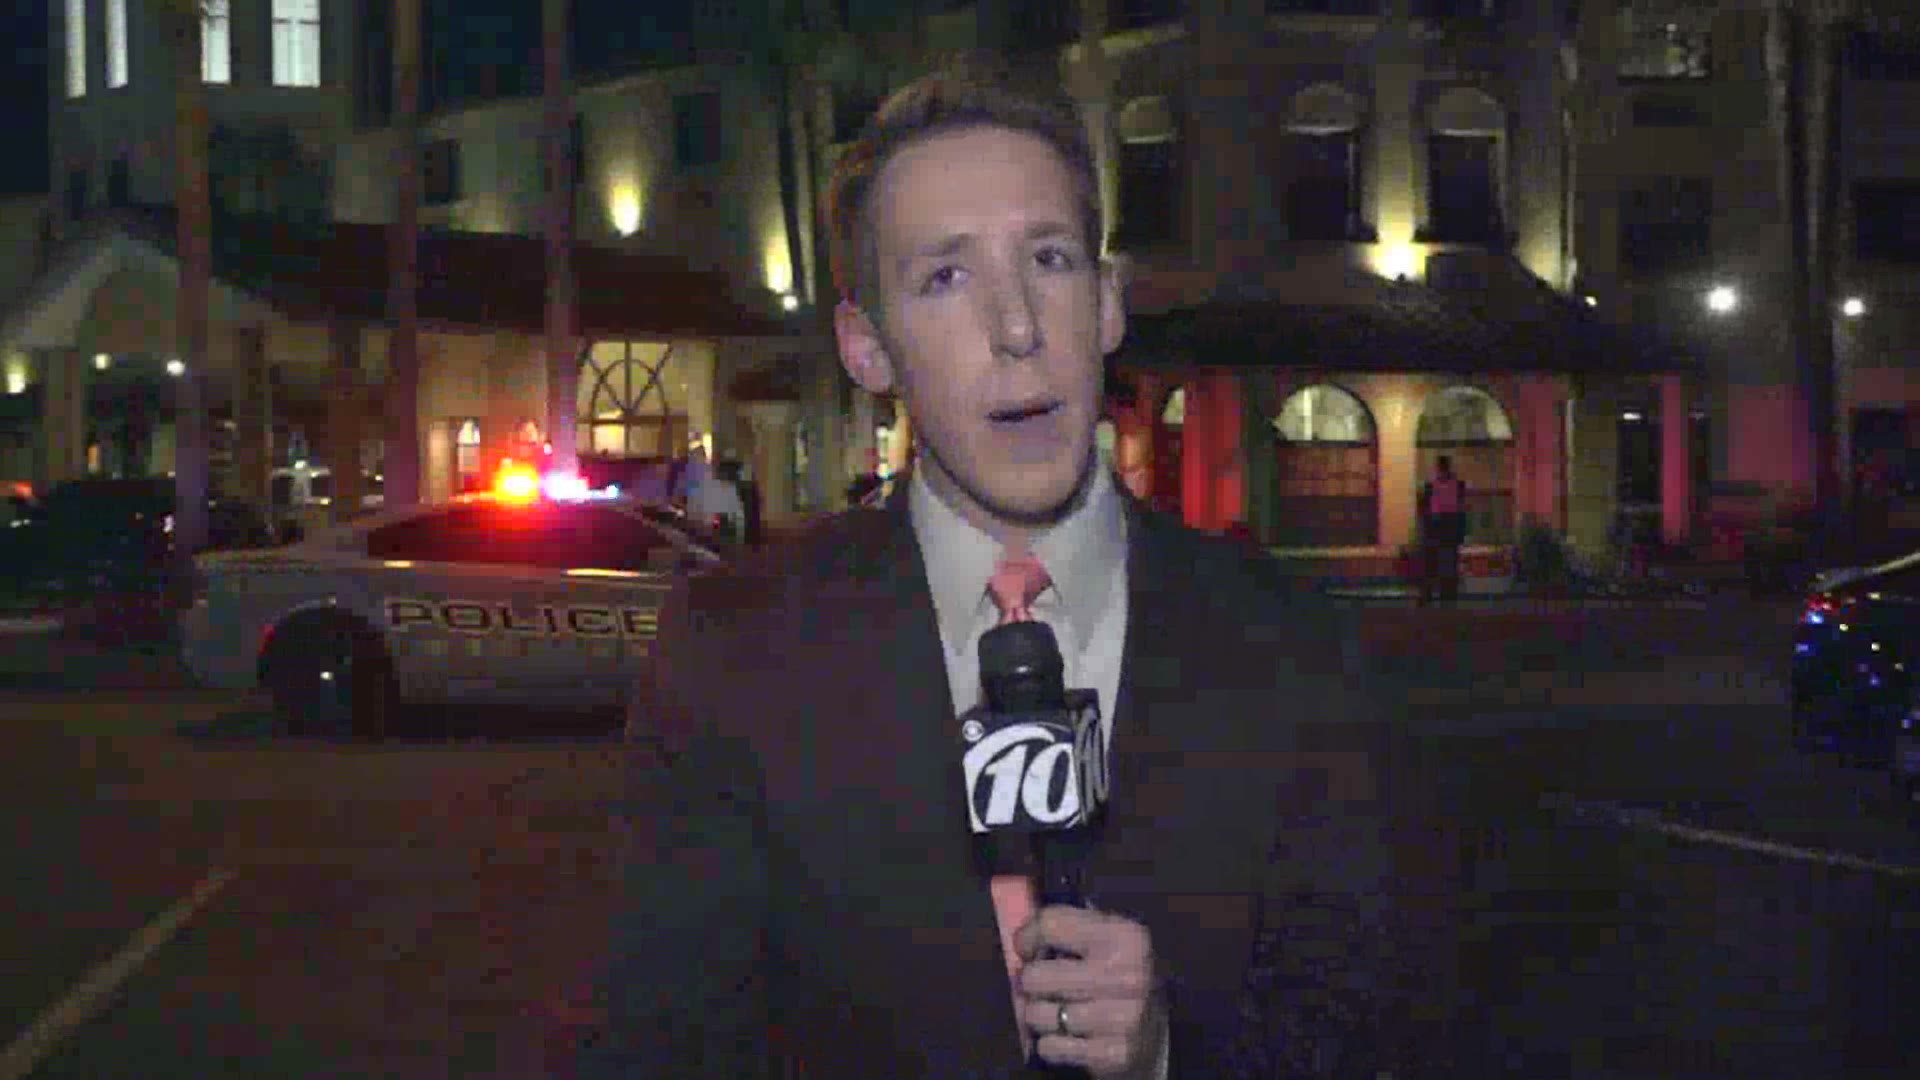 10News reporter Josh Sidorowicz reports from the scene after Wednesday's devastating shooting.